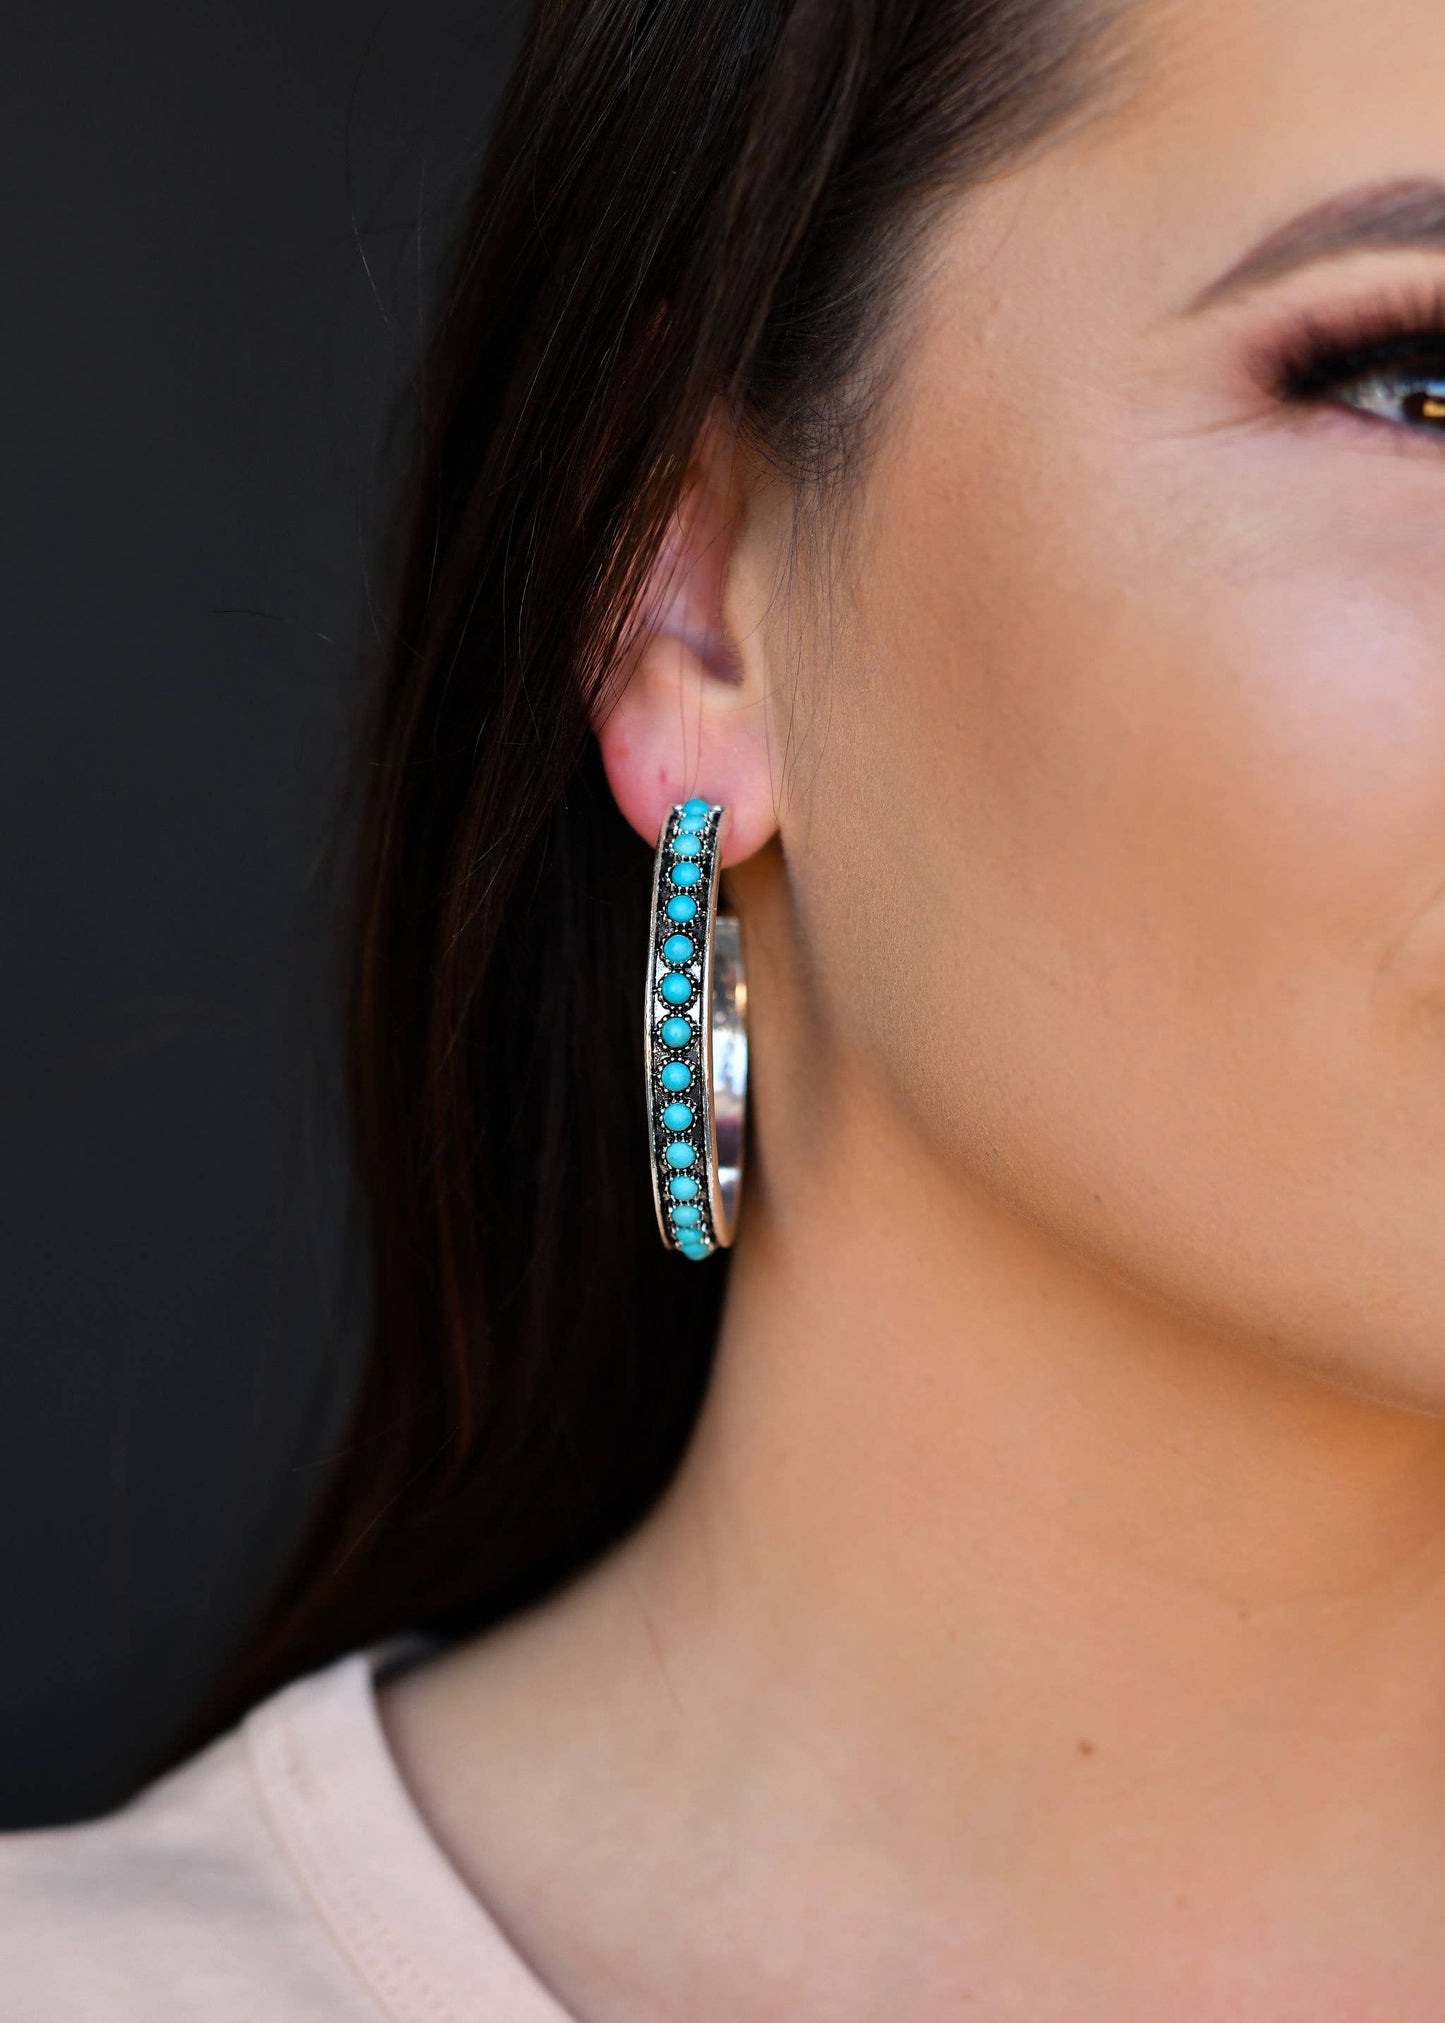 Burnished Silver and Turquoise Hoop Earring